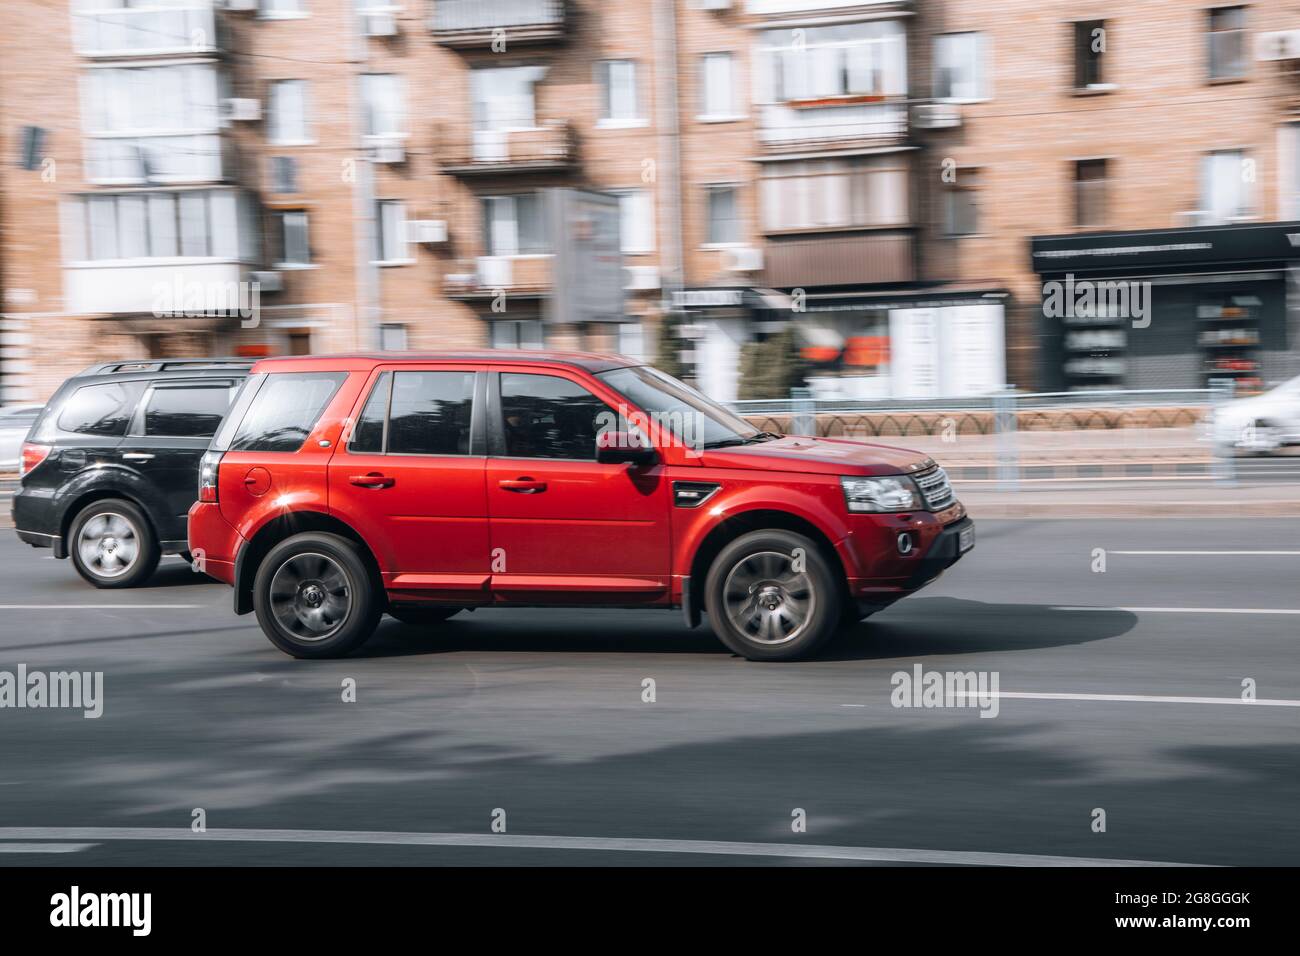 Ukraine, Kyiv - 16 July 2021: Red Land Rover Freelander car moving on the street. Editorial Stock Photo